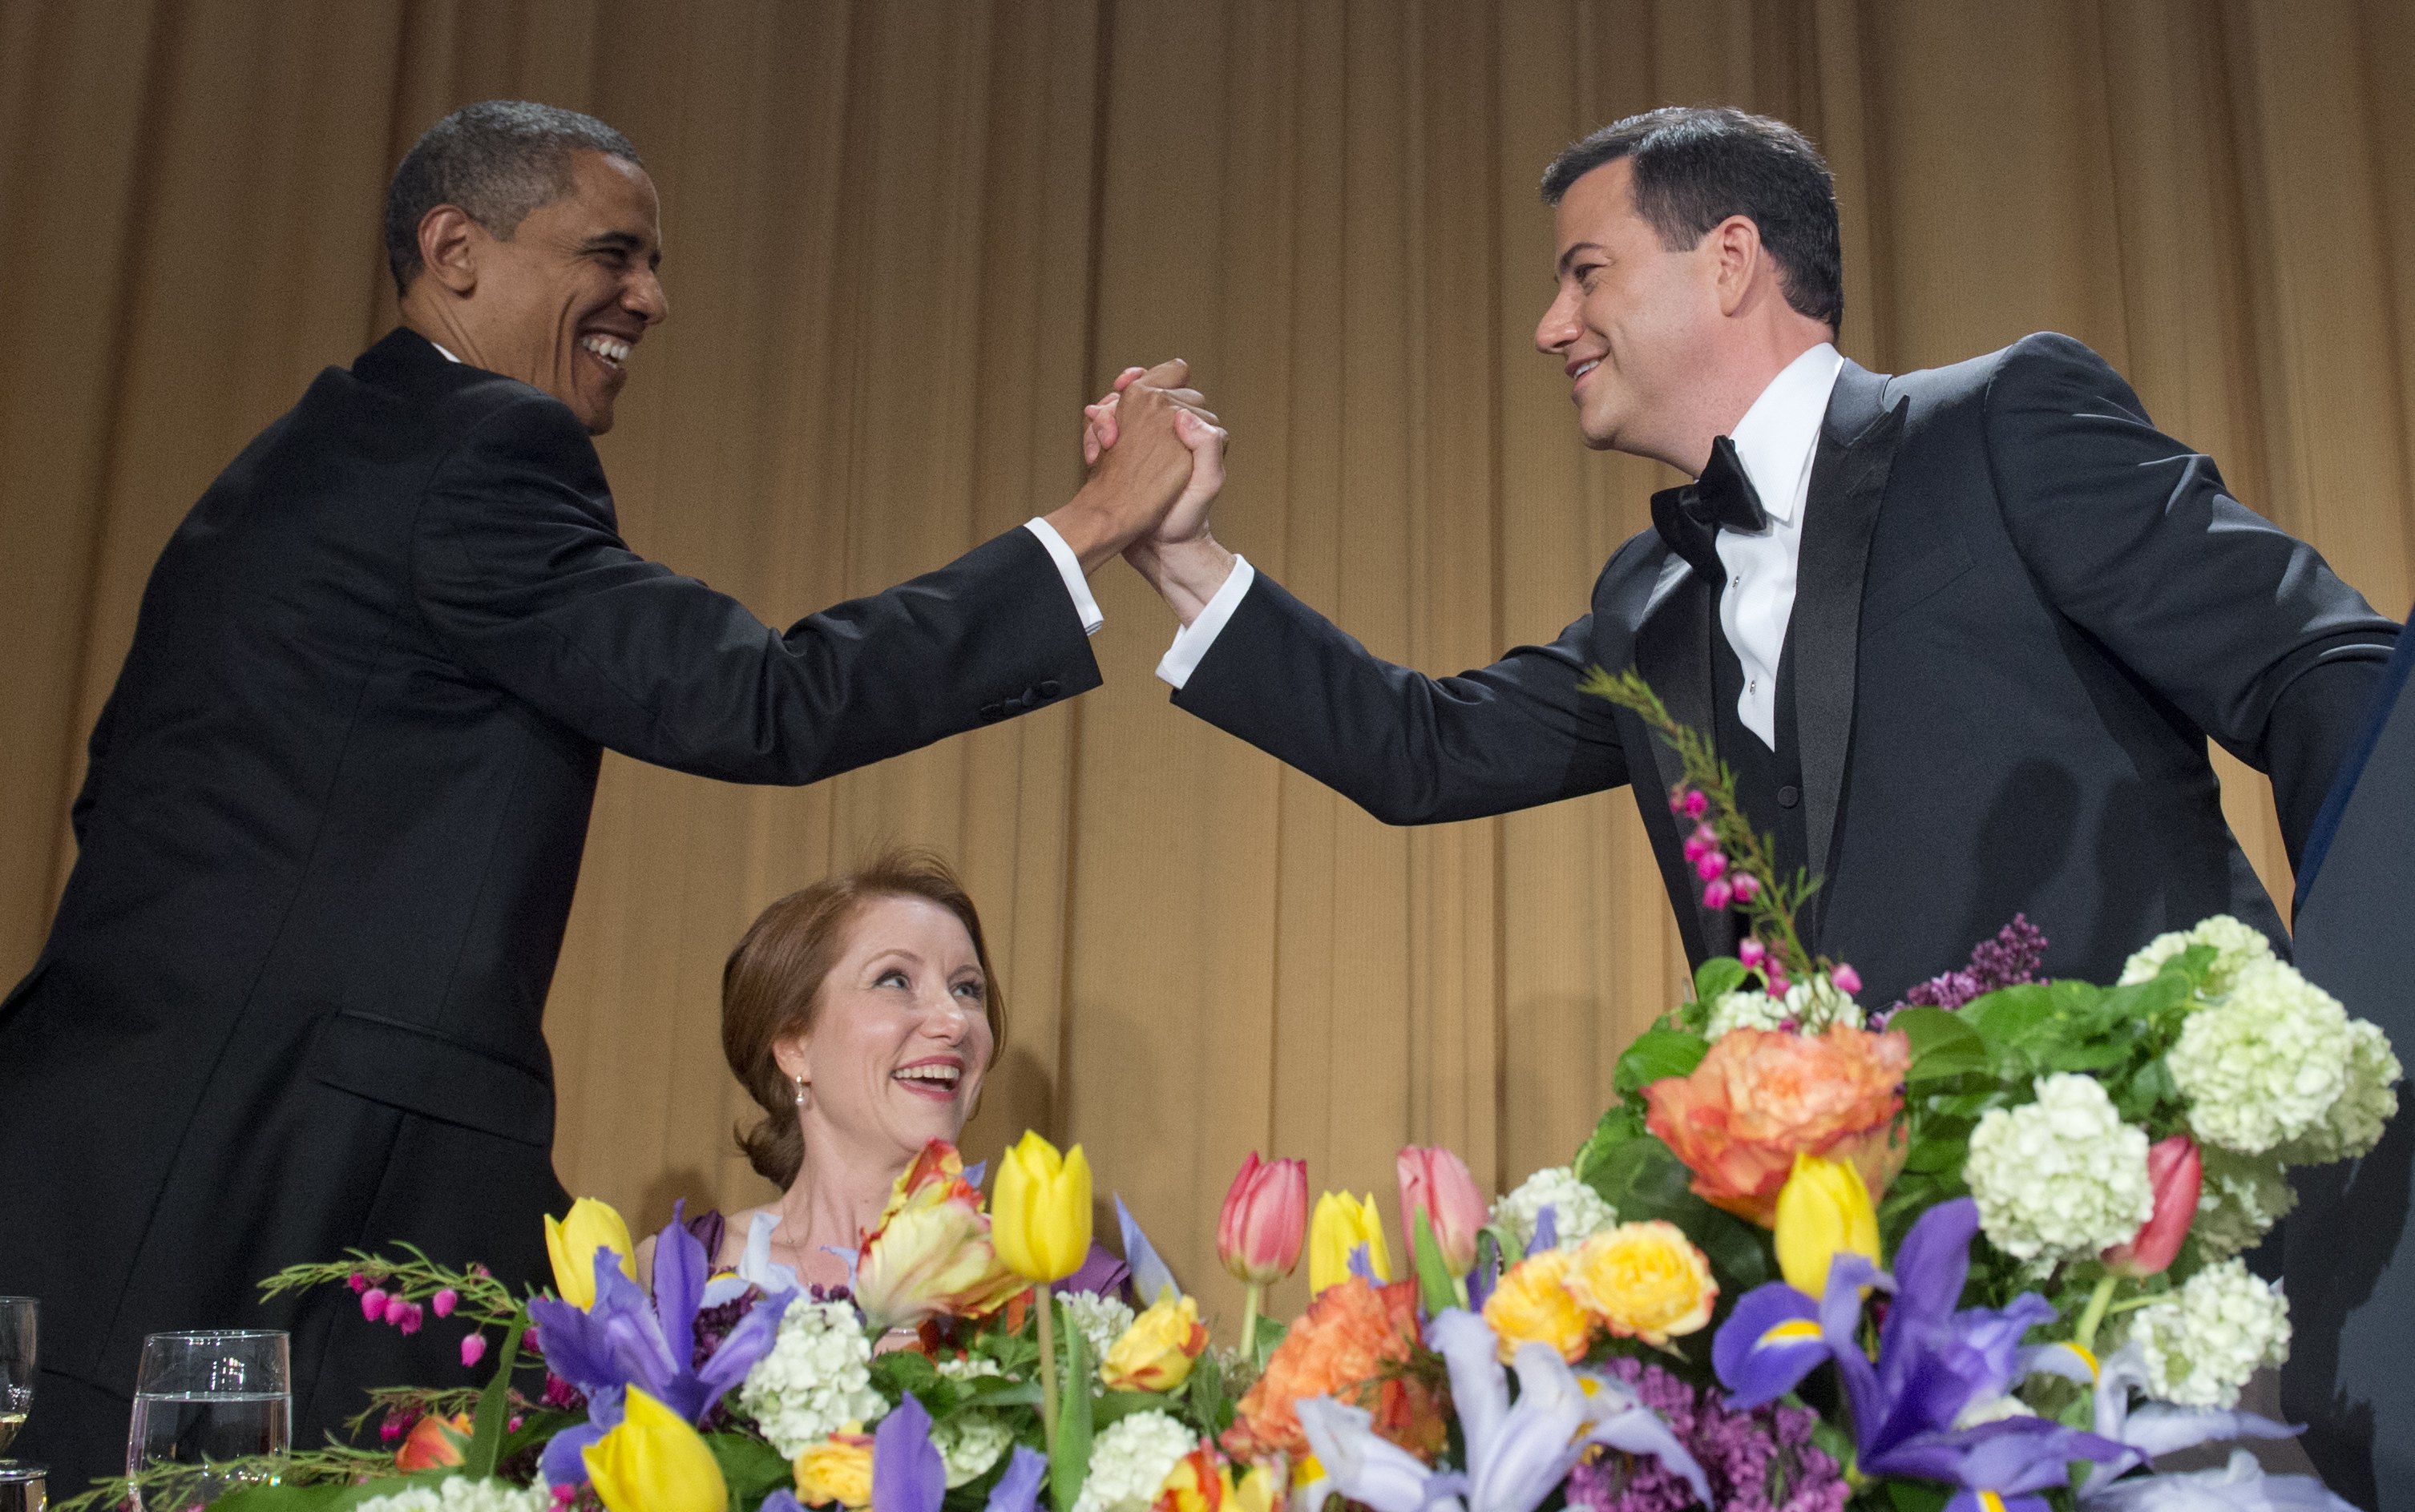 US President Barack Obama high-fives television host Jimmy Kimmel (R) during the White House Correspondents Association Dinner in Washington on April 28, 2012. (Saul Loeb—Getty Images)